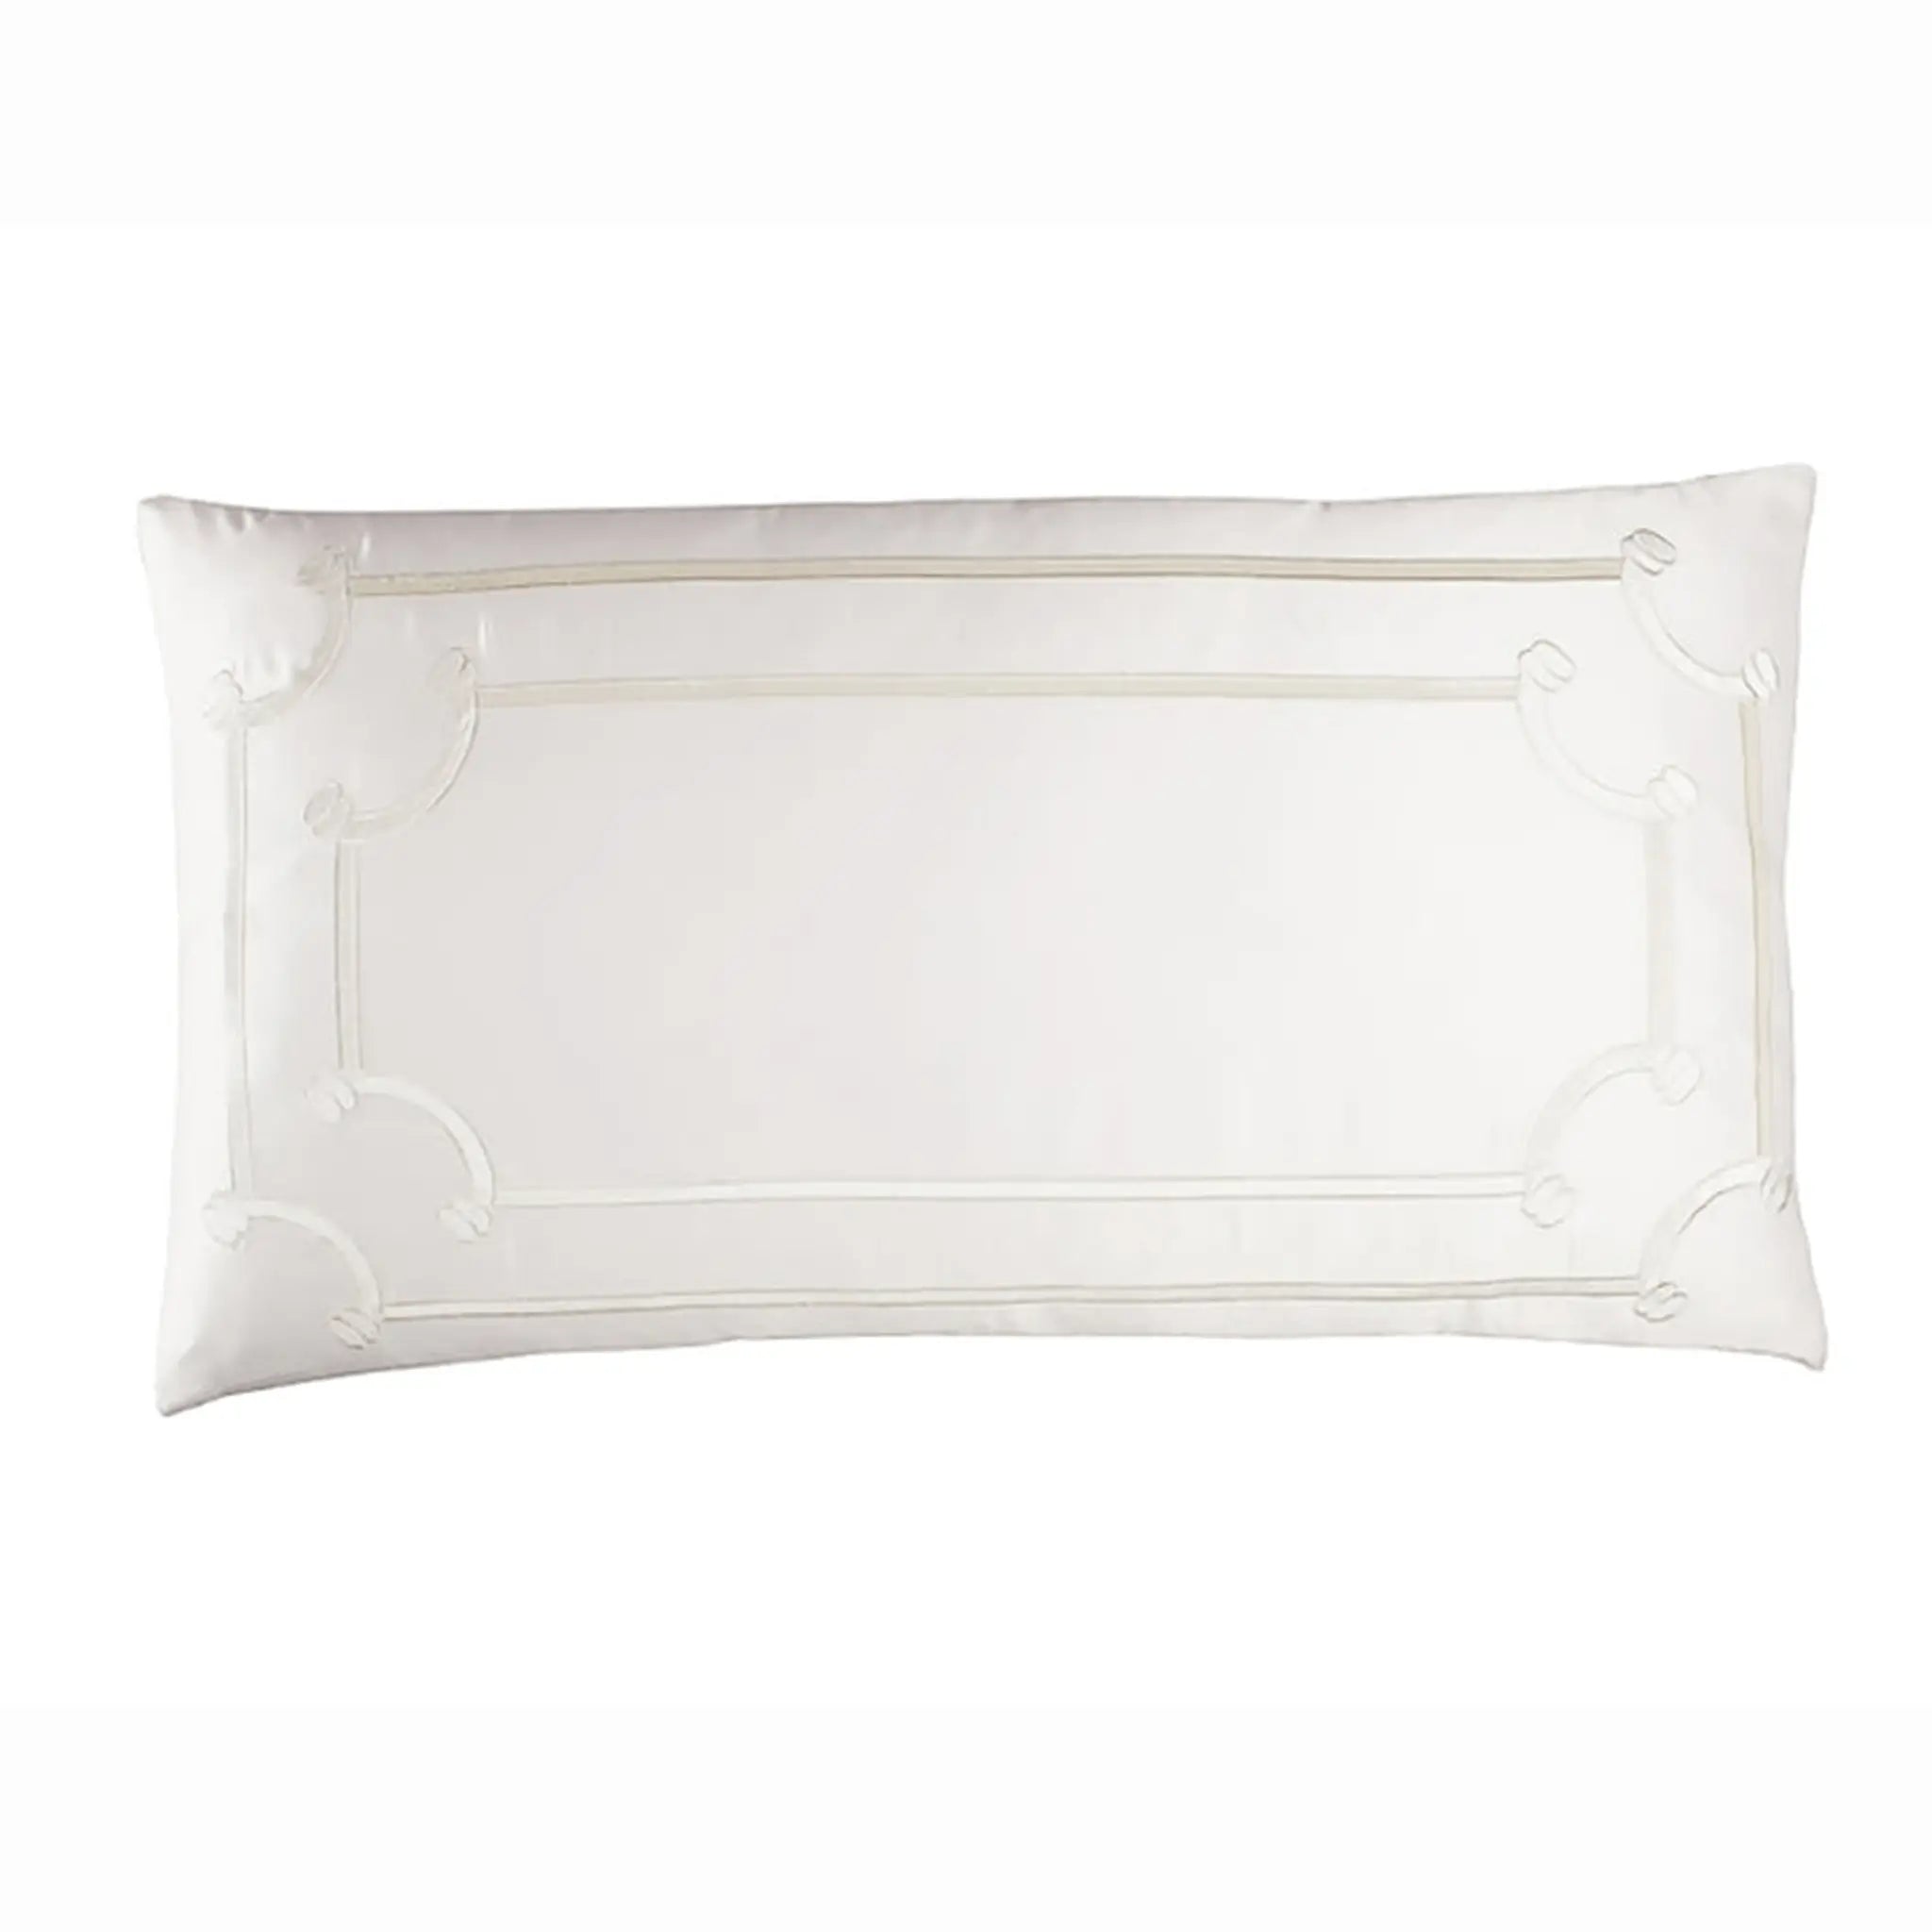 Lili Alessandra Vendome King Pillow in Ivory